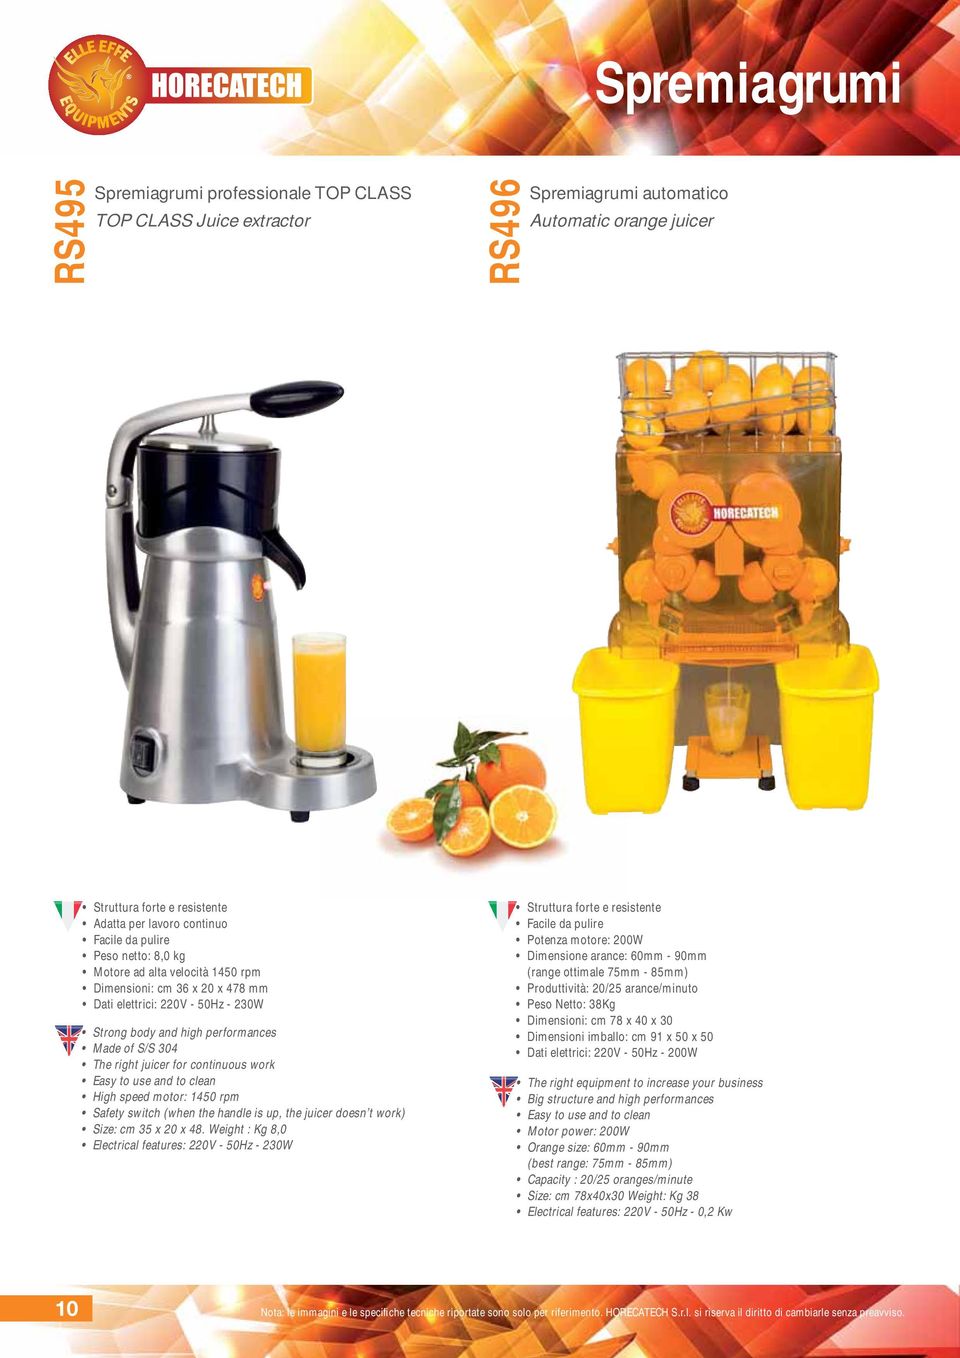 continuous work Easy to use and to clean High speed motor: 1450 rpm Safety switch (when the handle is up, the juicer doesn t work) Size: cm 35 x 20 x 48.